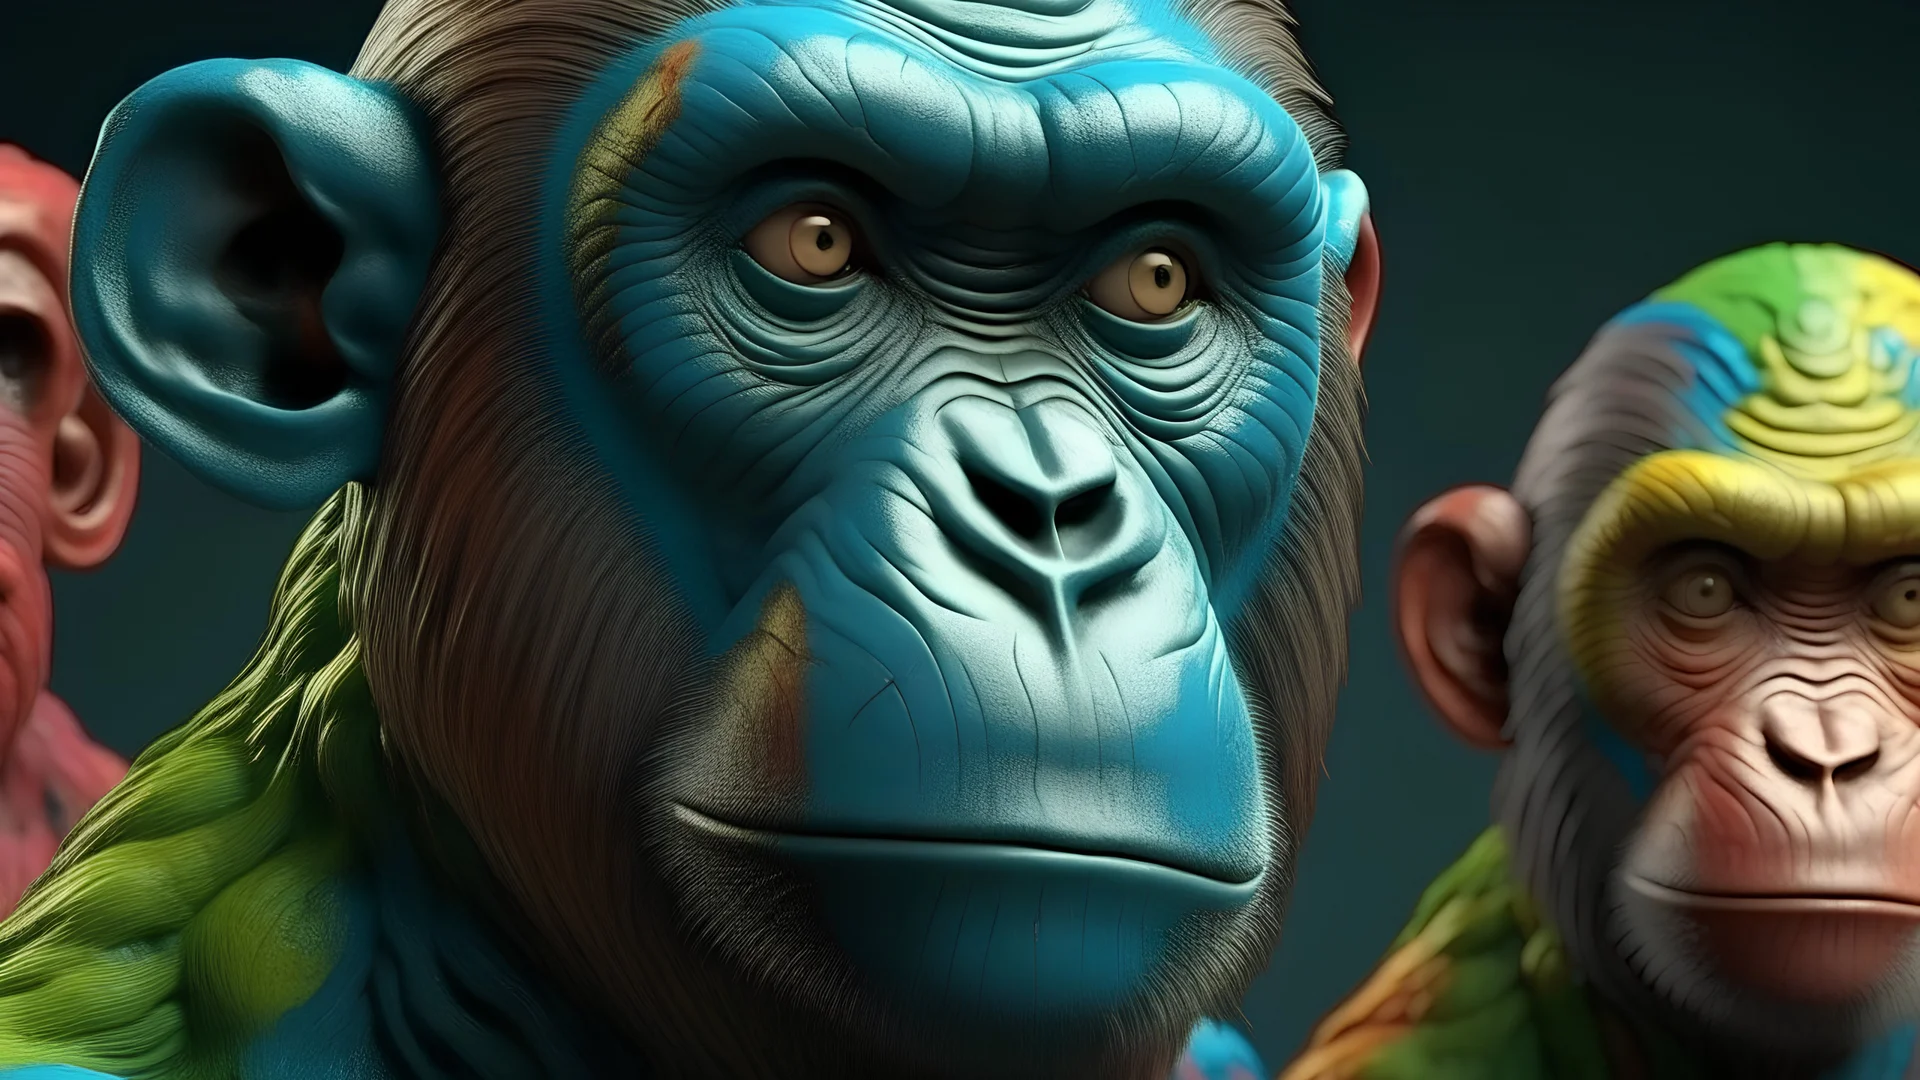 3D 16:9 VERY colorful hyper-realistic DETAILED PLANETS OF THE APES